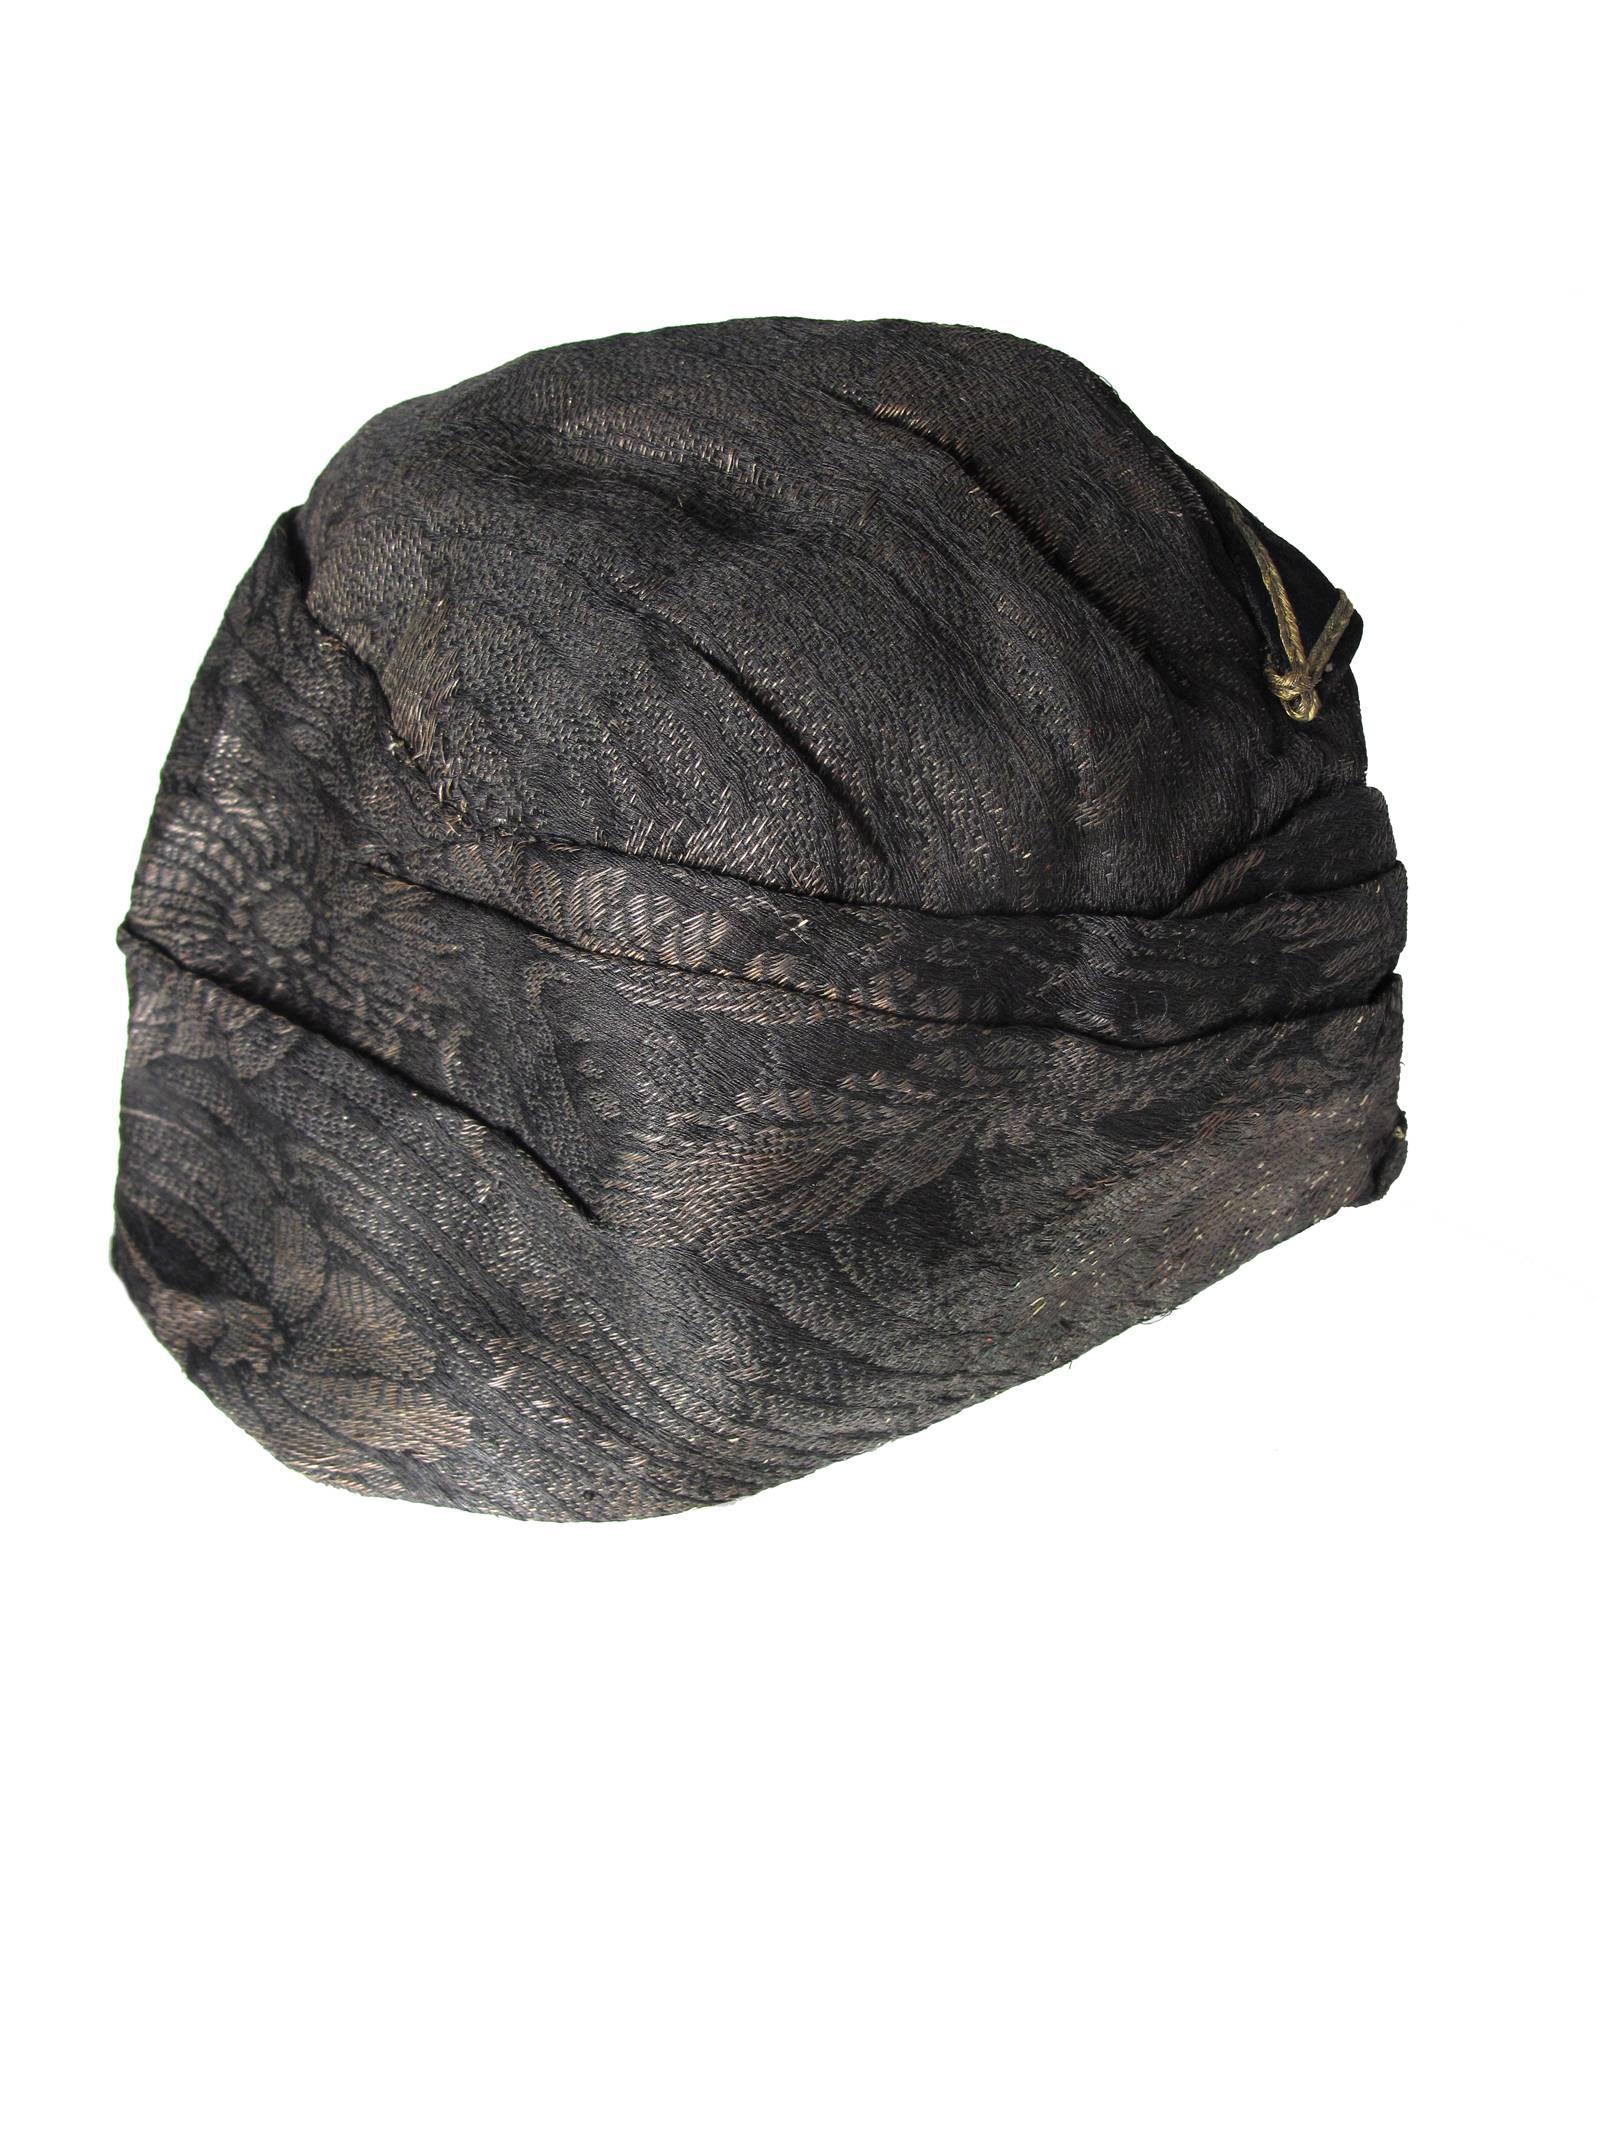 1920s brocade hat
We accept returns for refund, please see our terms.  We offer free ground shipping within the US.  Please let us know if you have any questions. 
